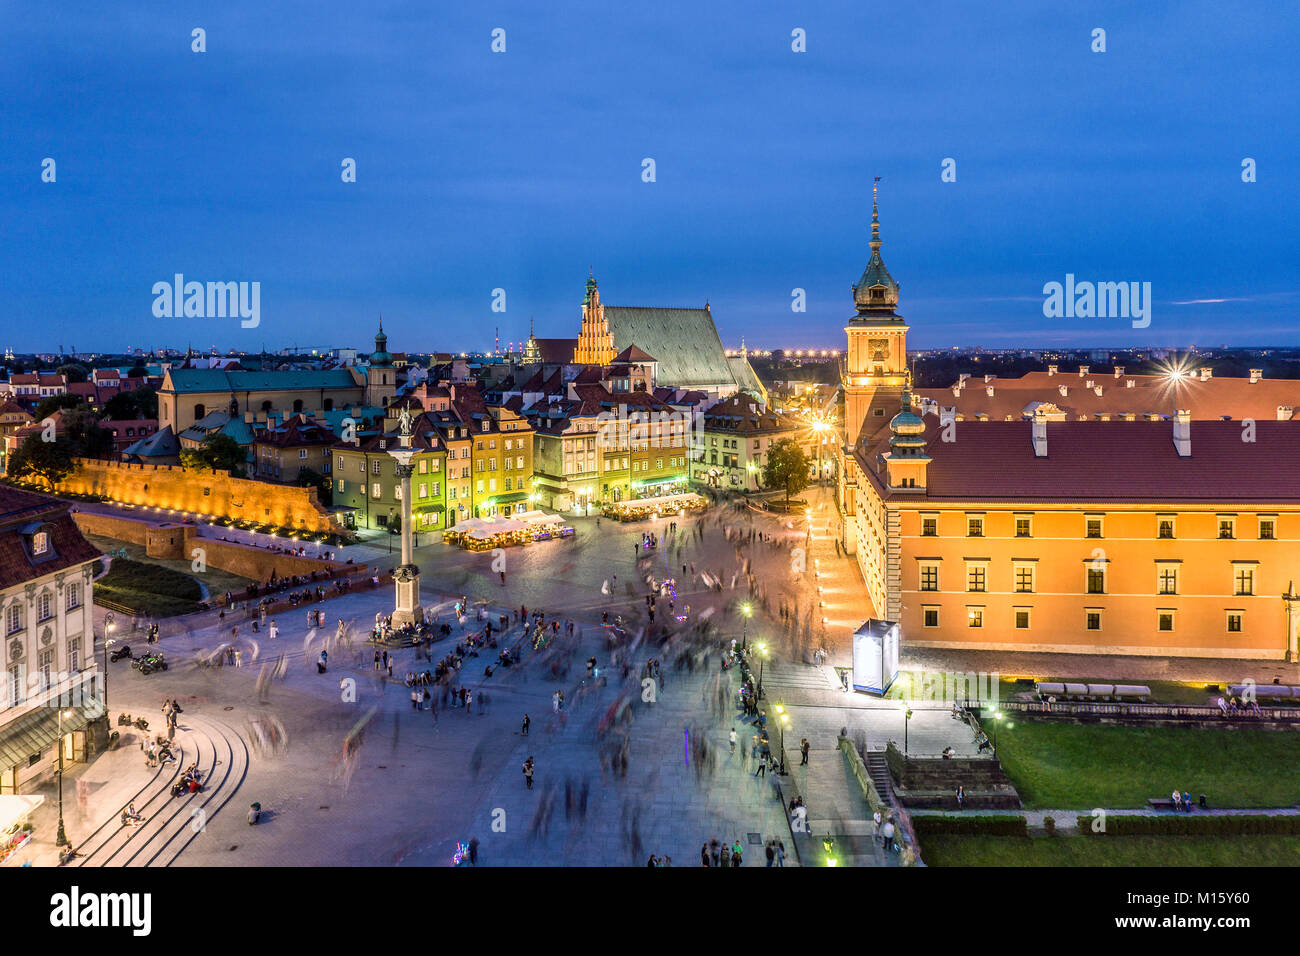 Royal Castle and Sigmund Column monument with many people passing by in the evening,Warsaw,Poland Stock Photo